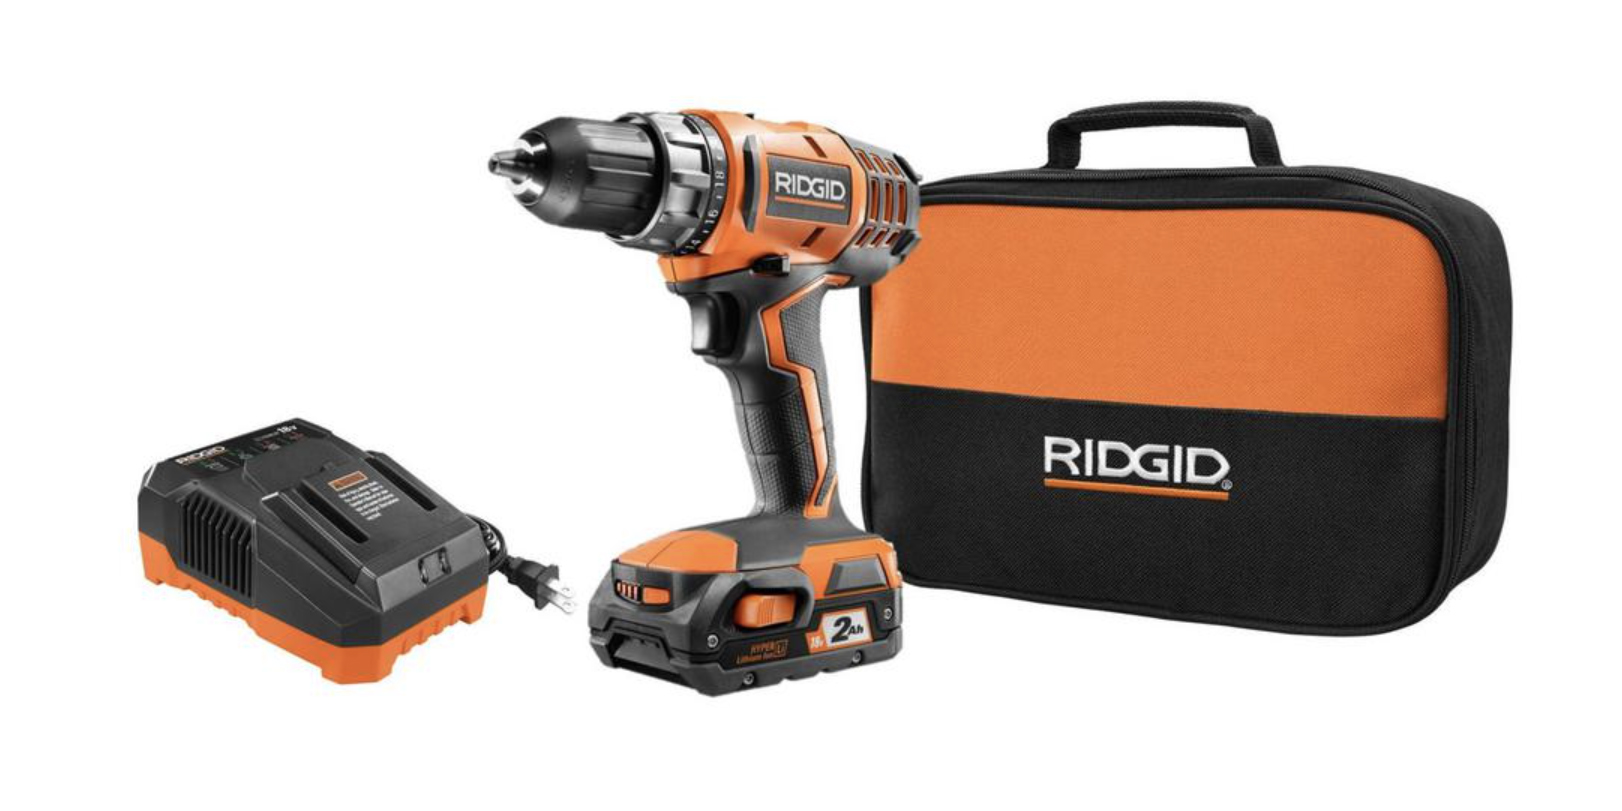 Home Depot&#39;s RIDGID Black Friday tool sale takes up to 40% off DIY essentials - 9to5Toys